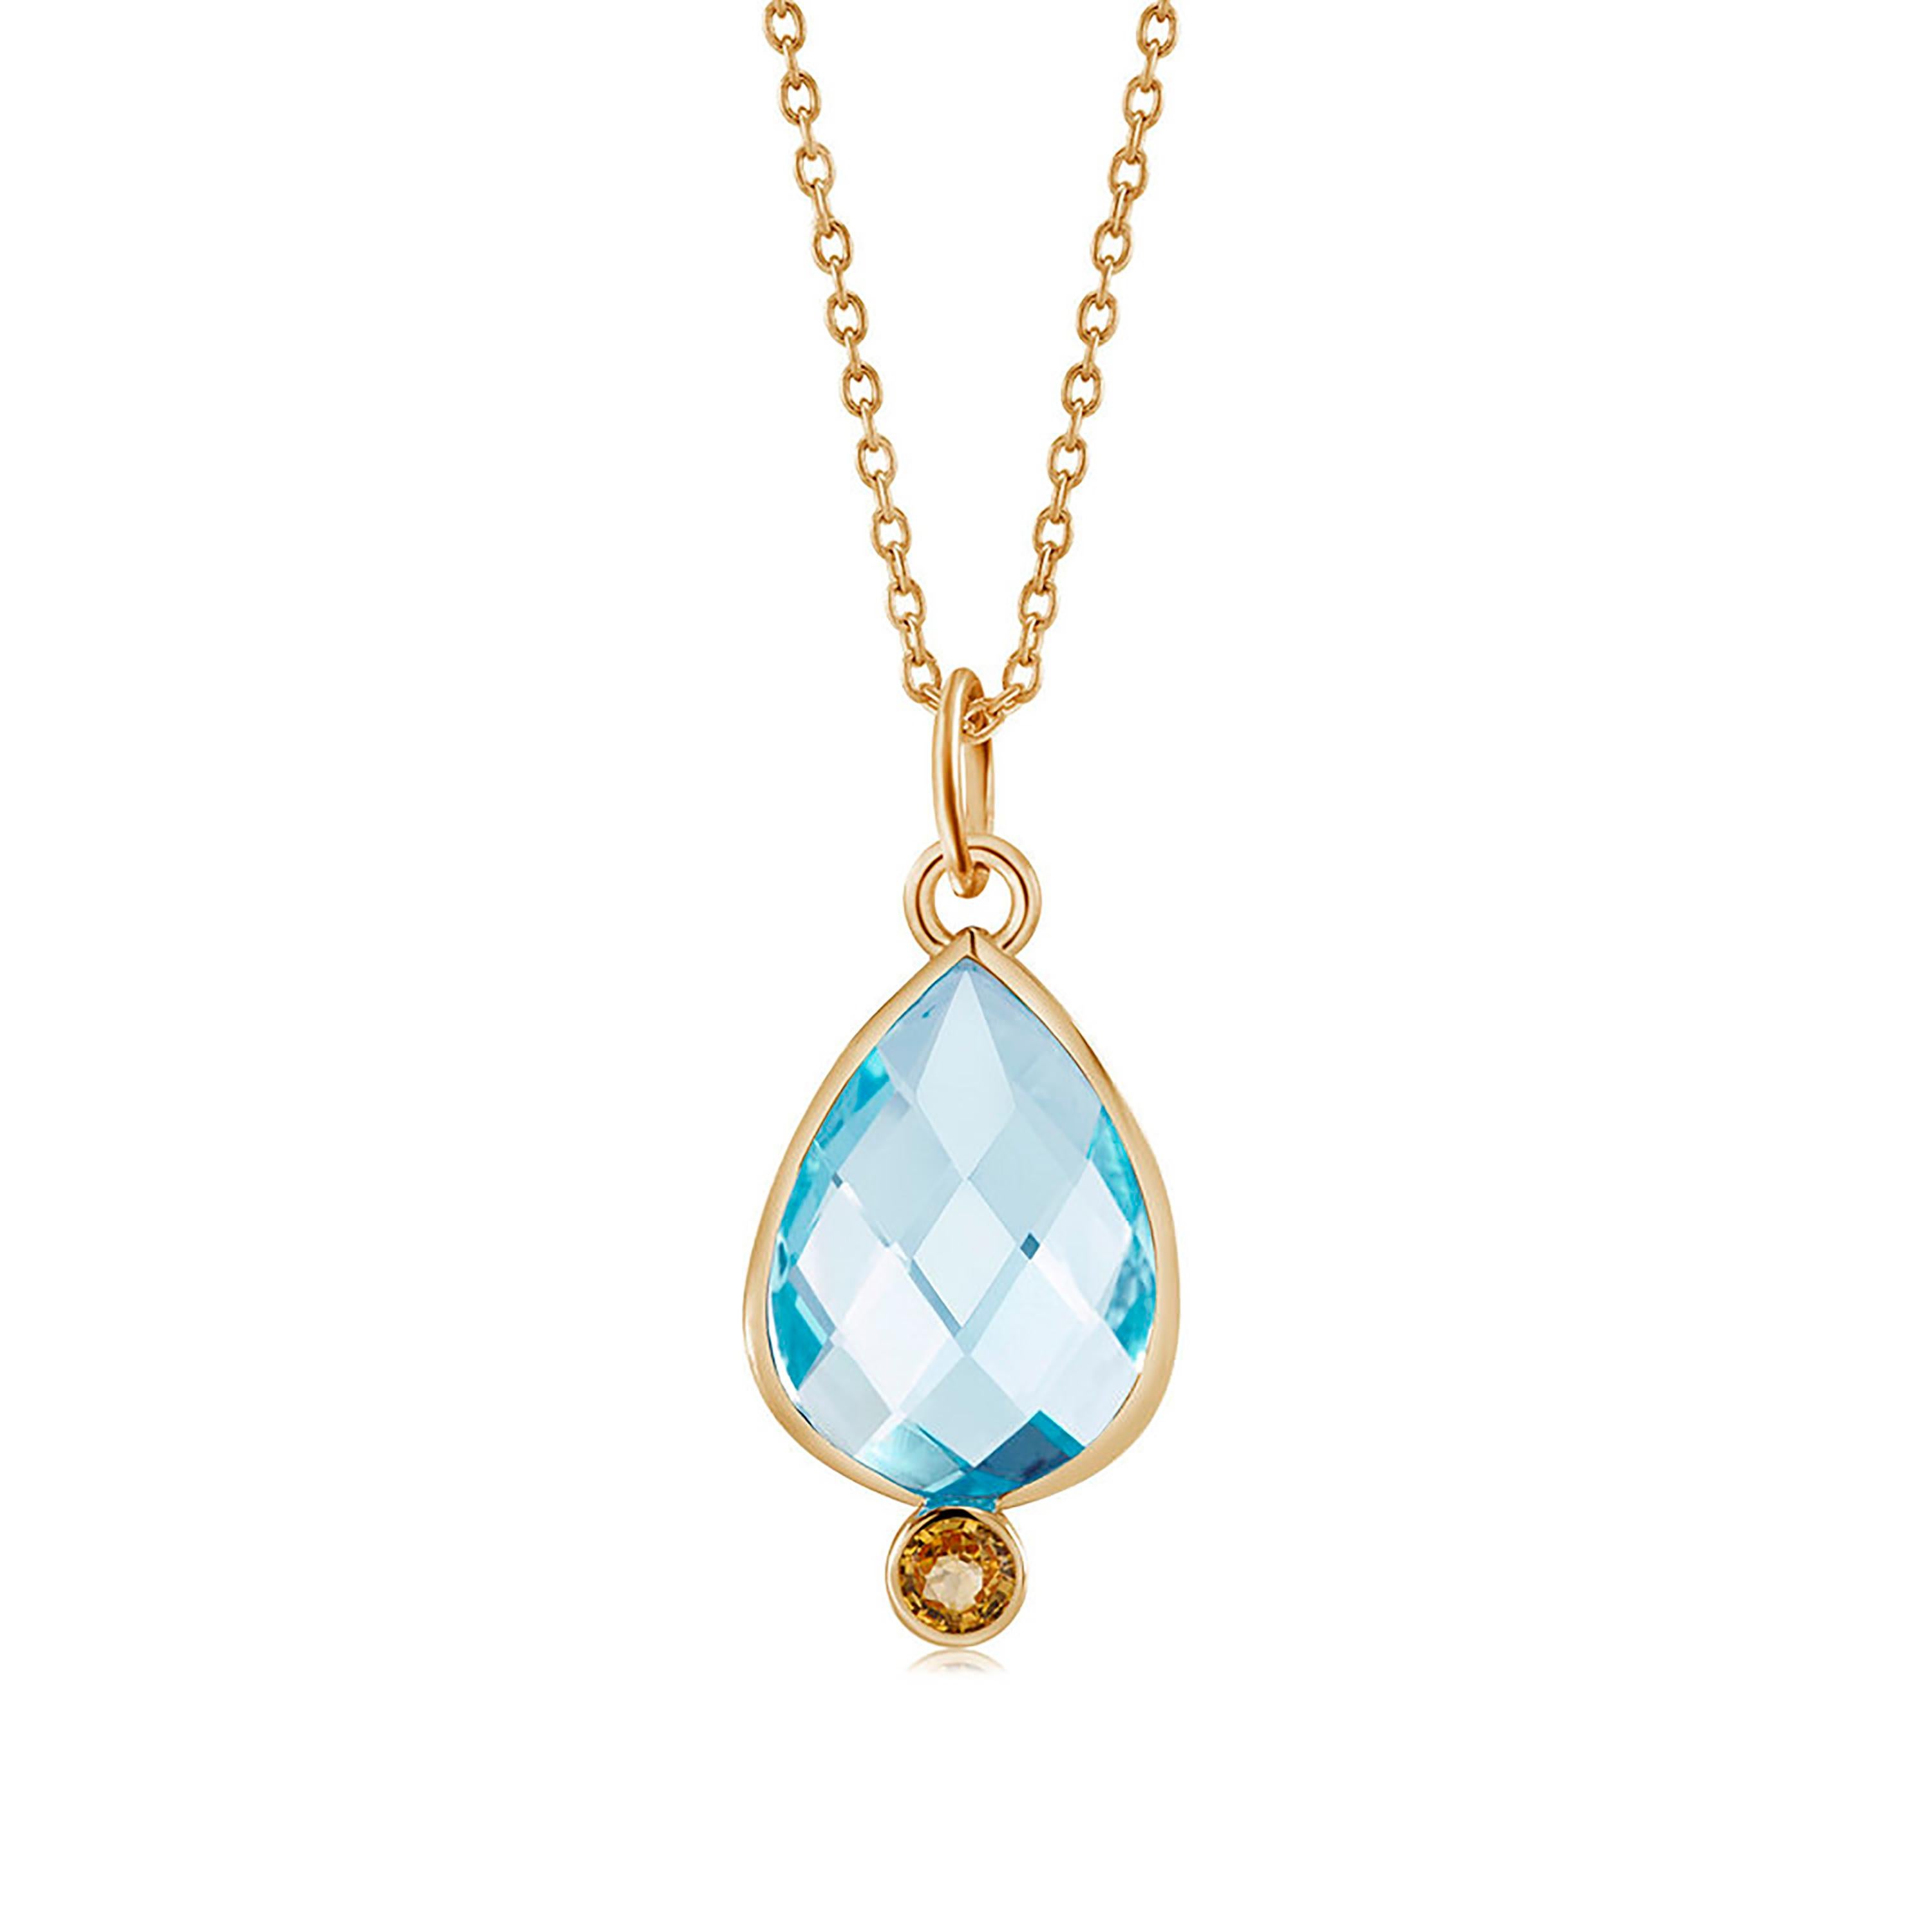 Pear Cut Double Sided Briolette Blue Topaz Silver Pendant Necklace Yellow Gold-Plated